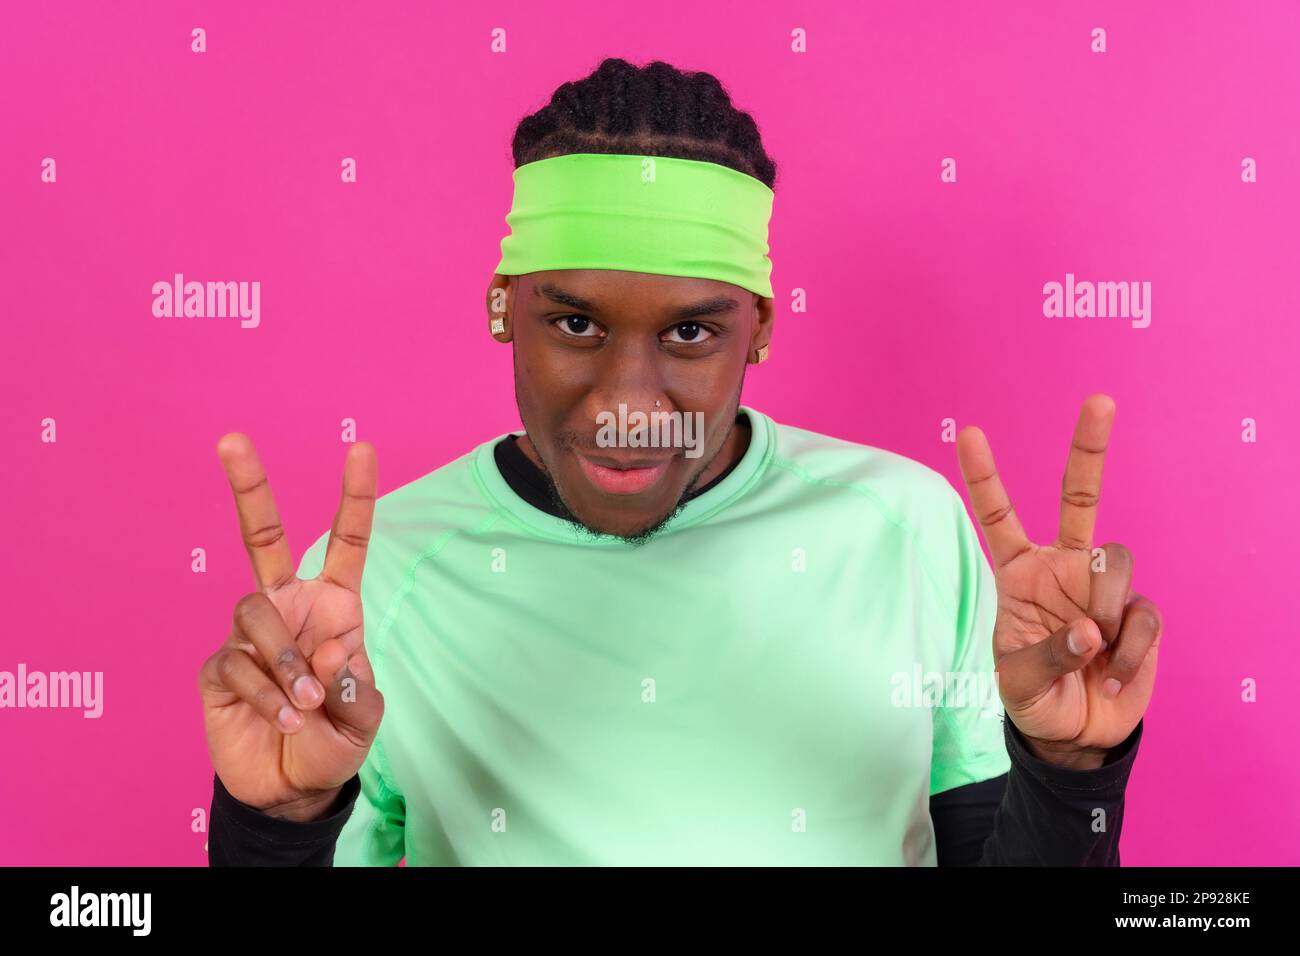 Black ethnic man in green clothes on a pink background, making the win gesture Stock Photo